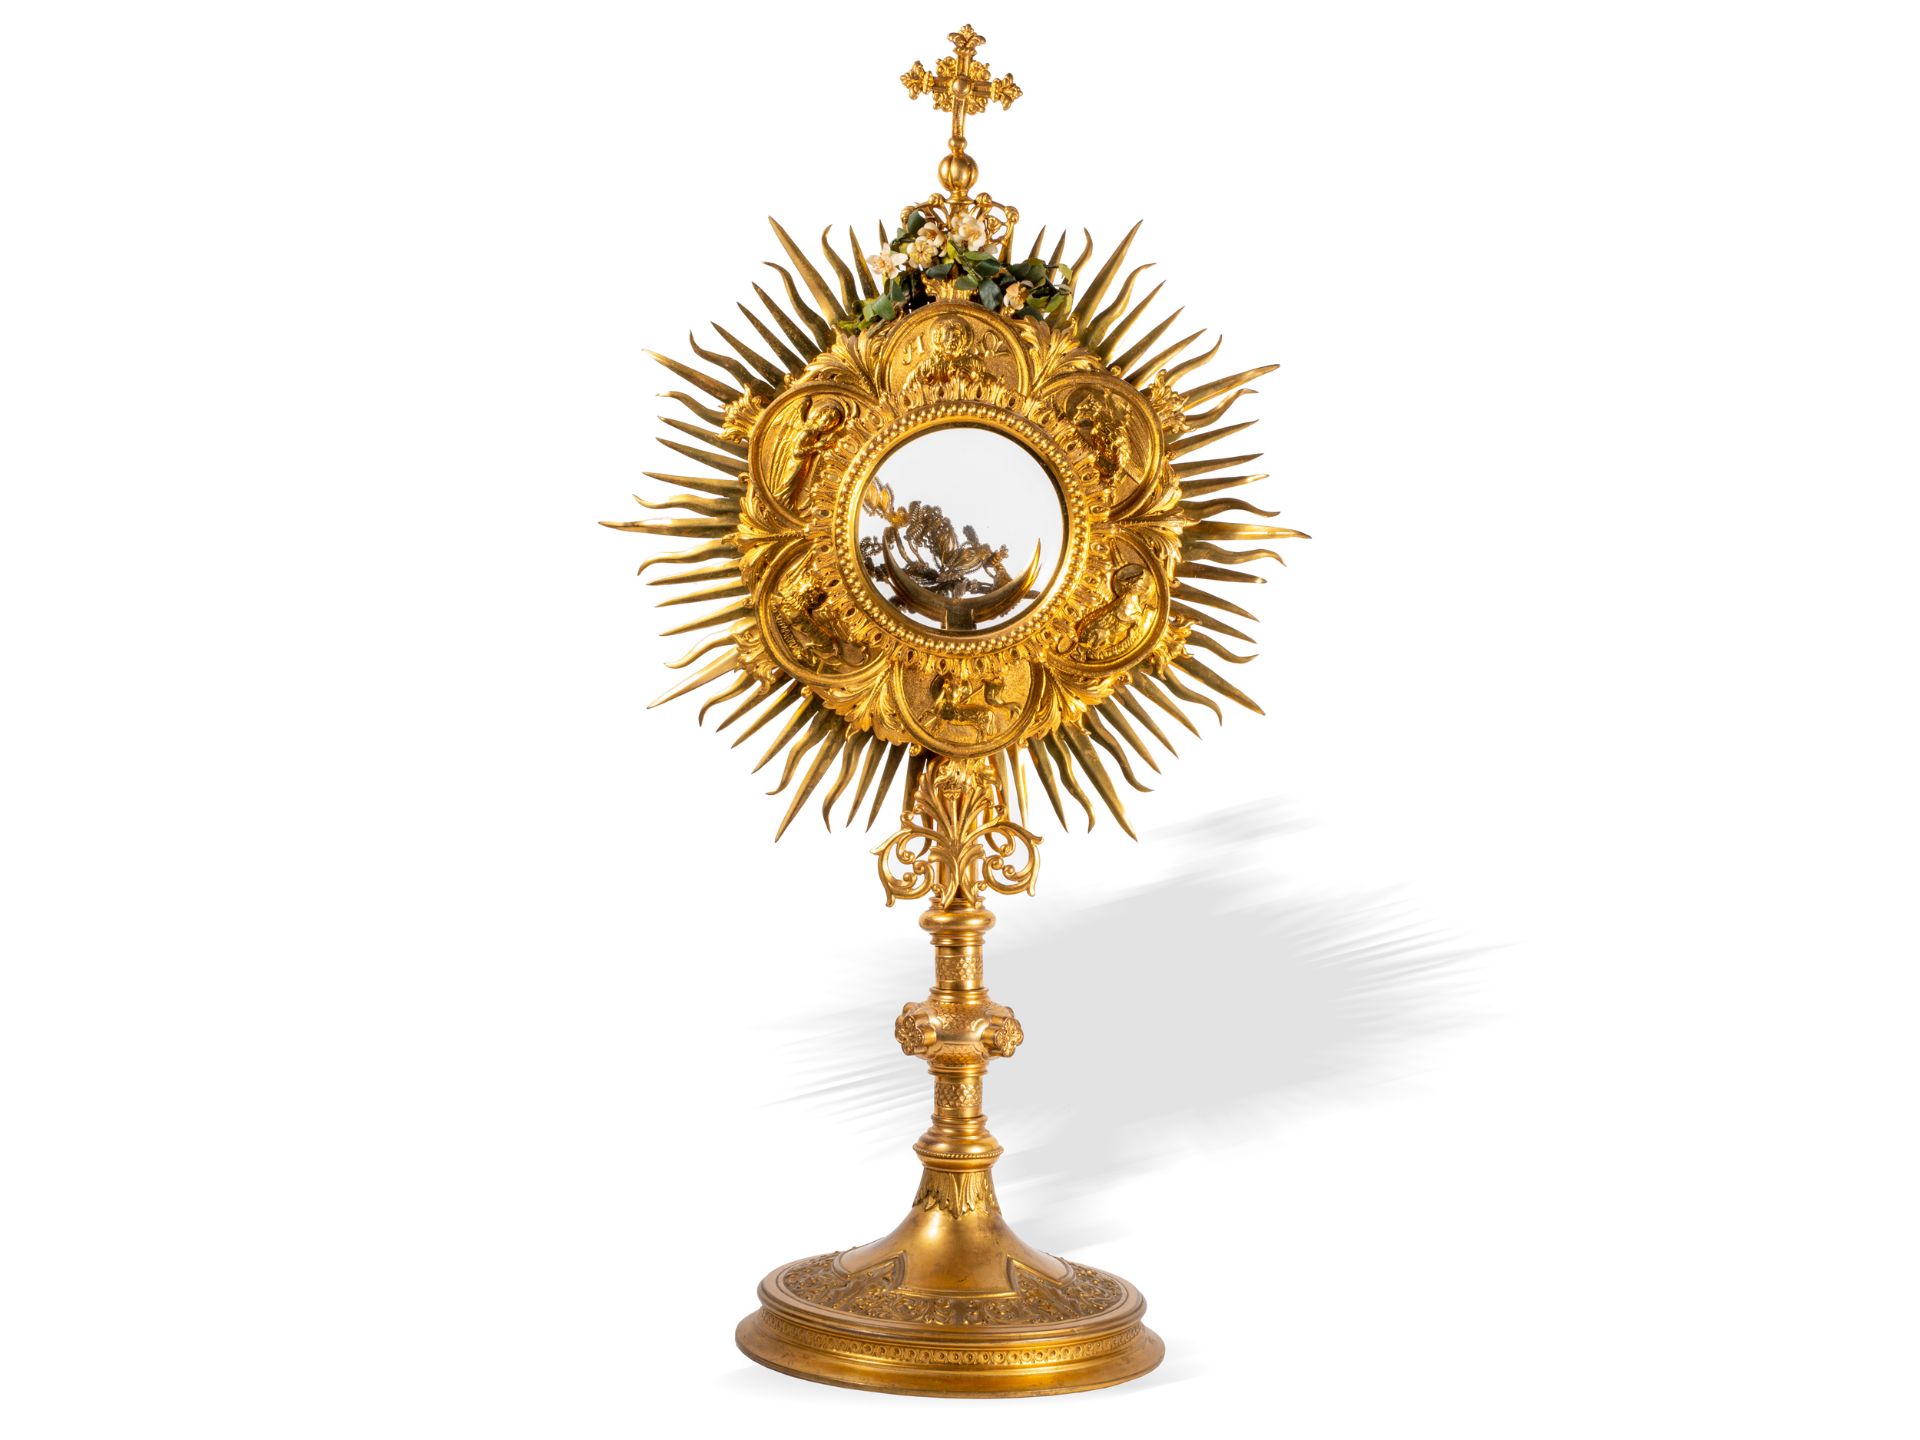 Monstrance, 19th century, Cast brass or bronze, handmolded and engraved